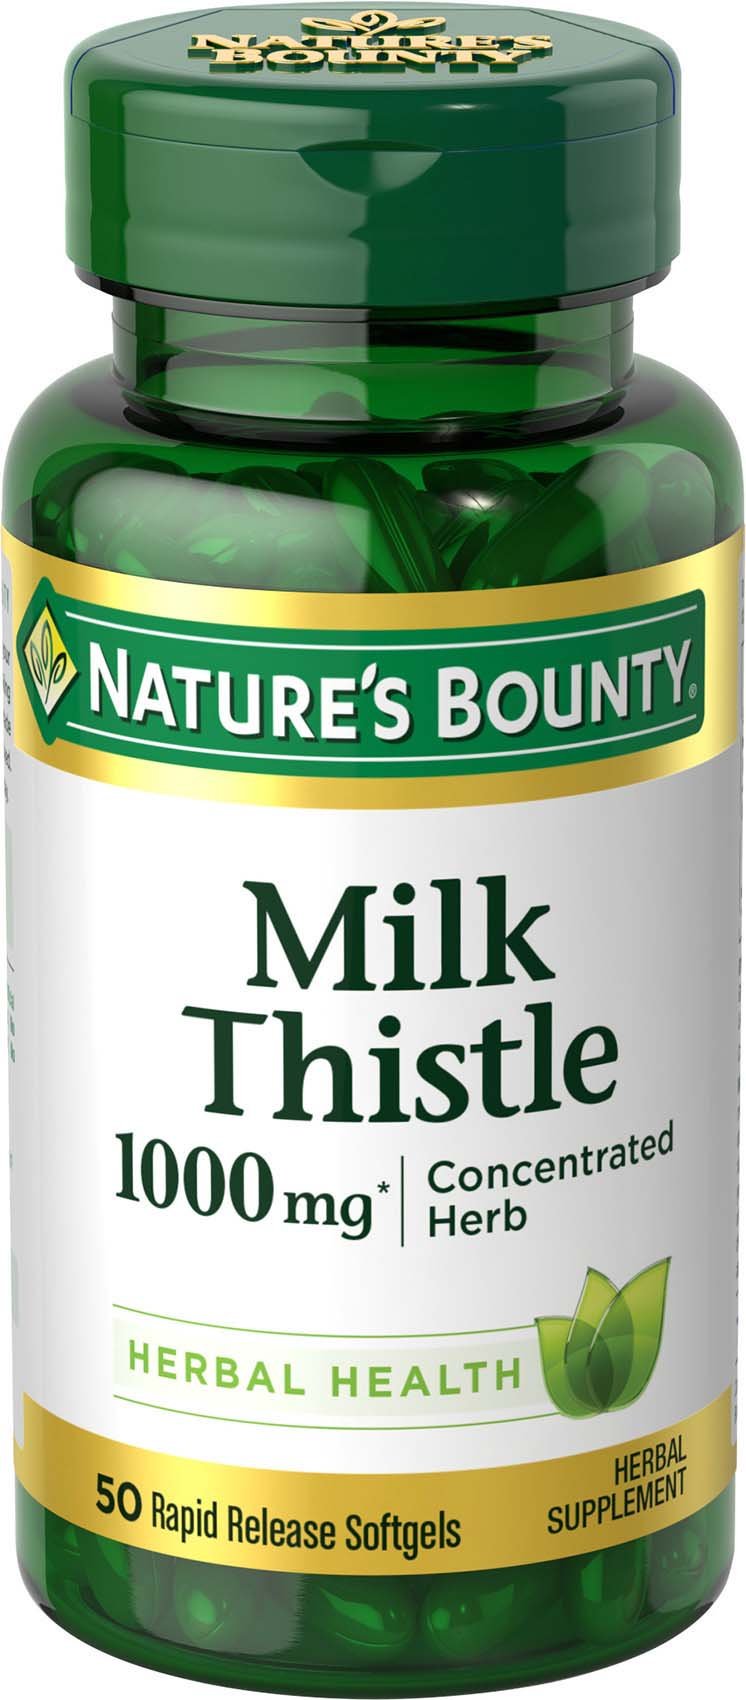 Nature's Bounty Milk Thistle, Herbal Health Supplement, Supports Liver Health, 1000 mg, 50 softgels